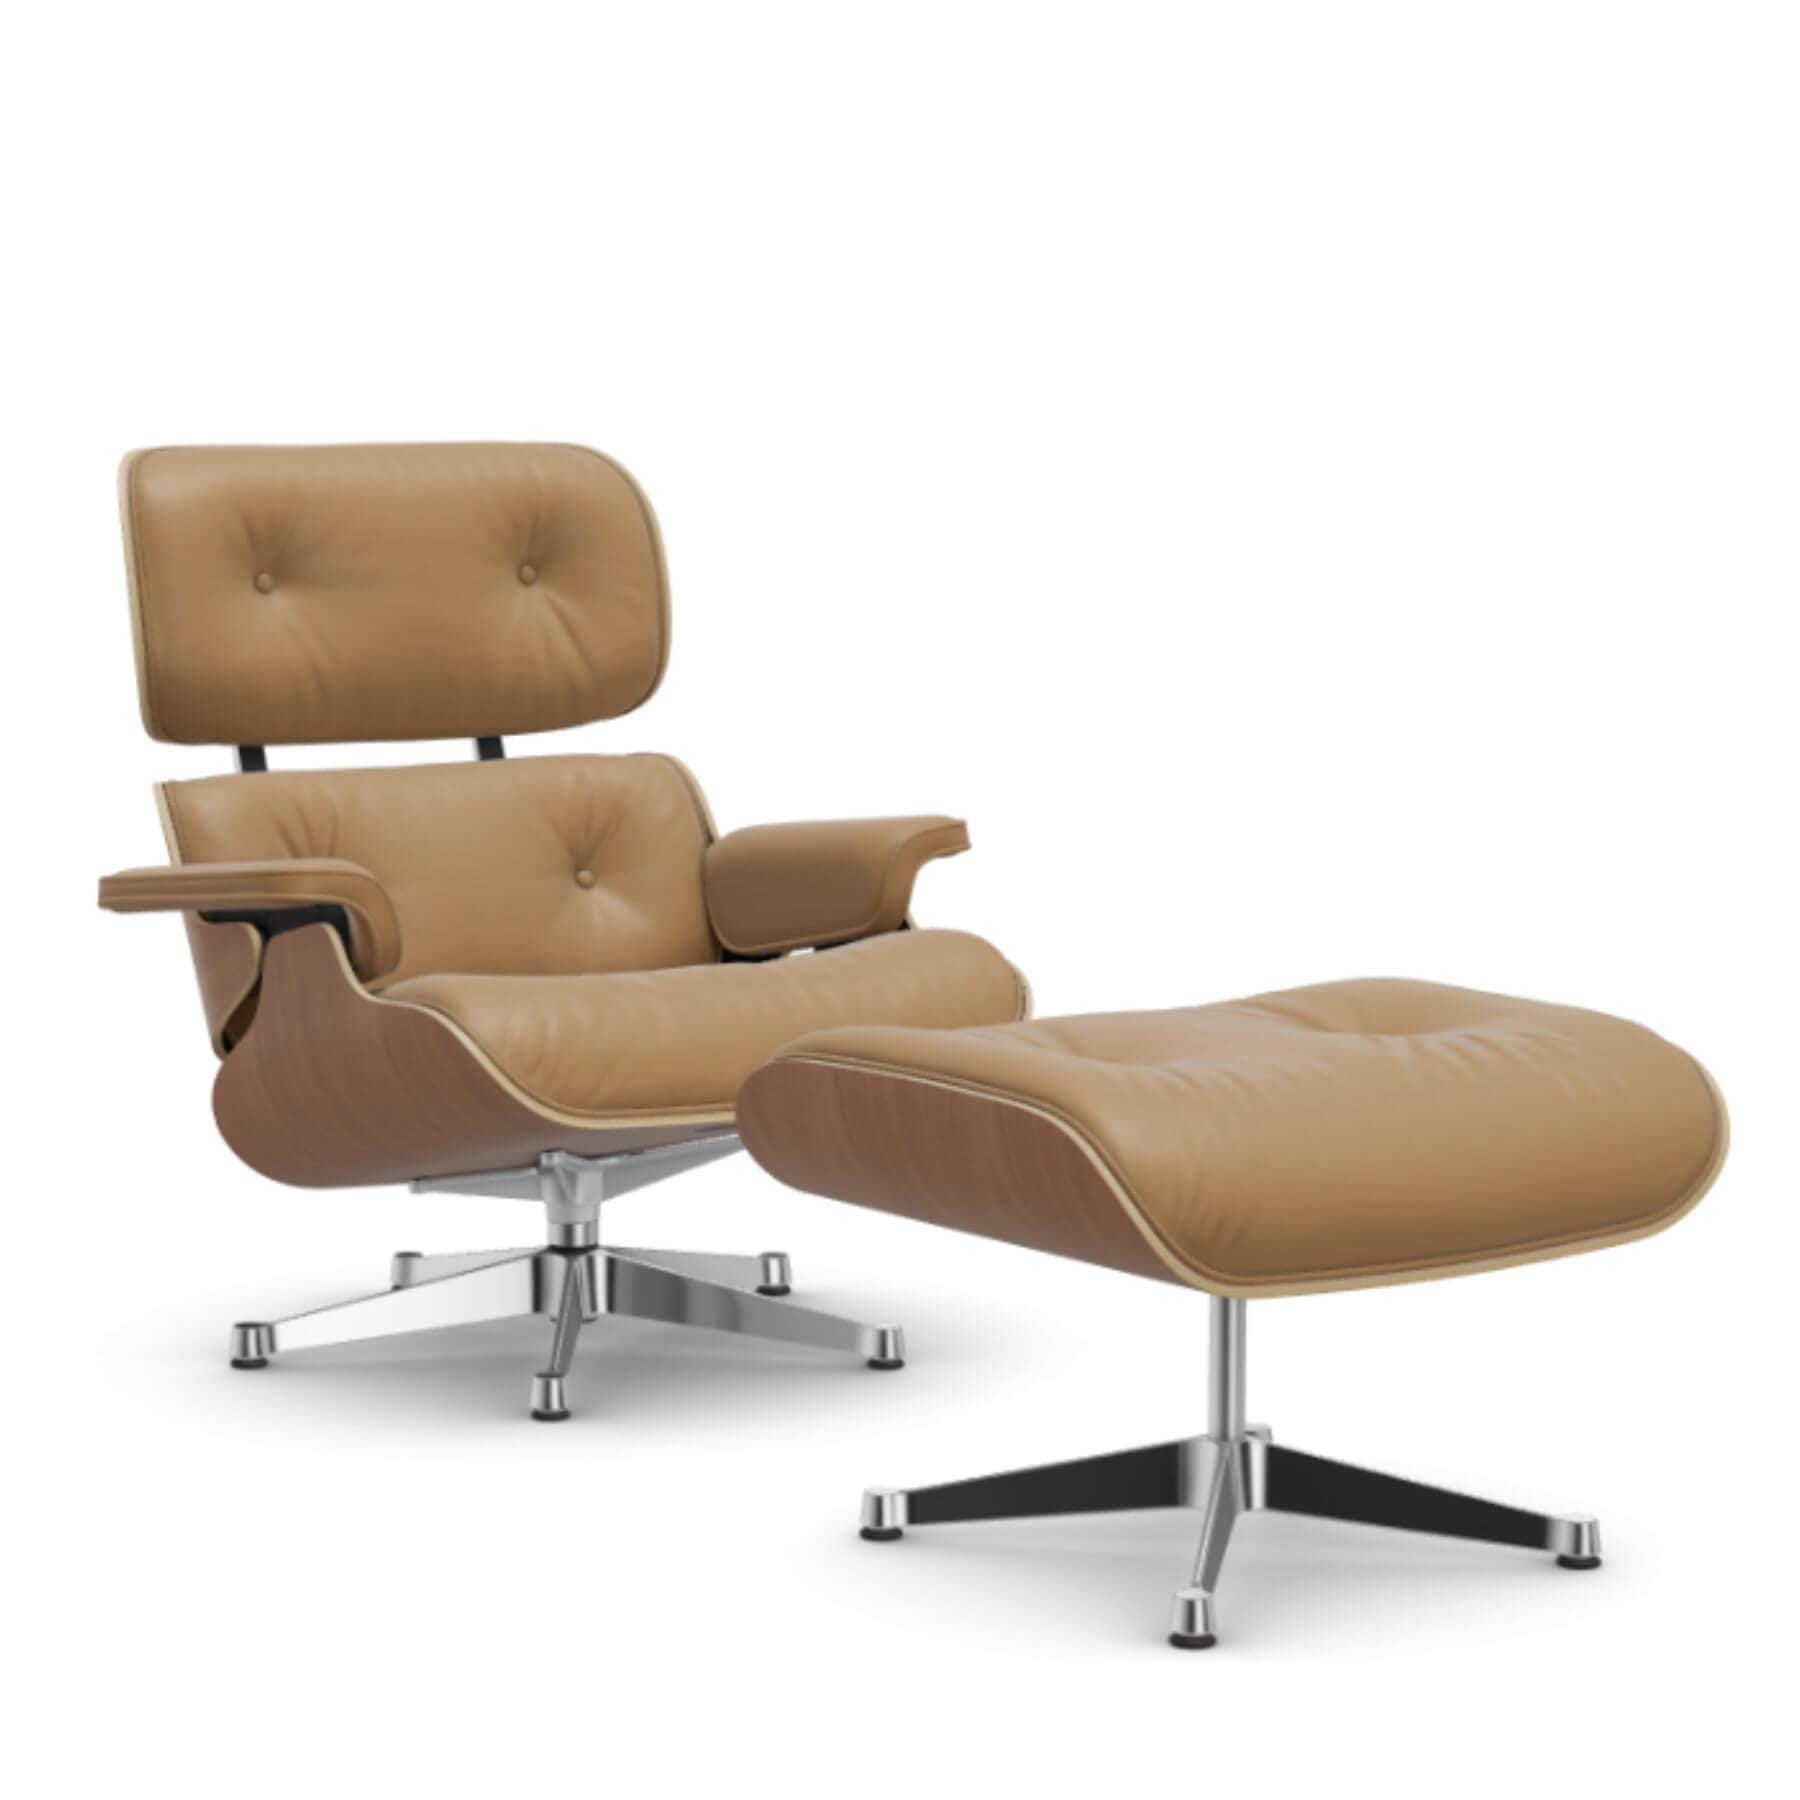 Vitra Eames Lounge Chair American Cherry Leather Natural F Caramel Polished Aluminium With Ottoman Light Wood Designer Furniture From Holloways Of